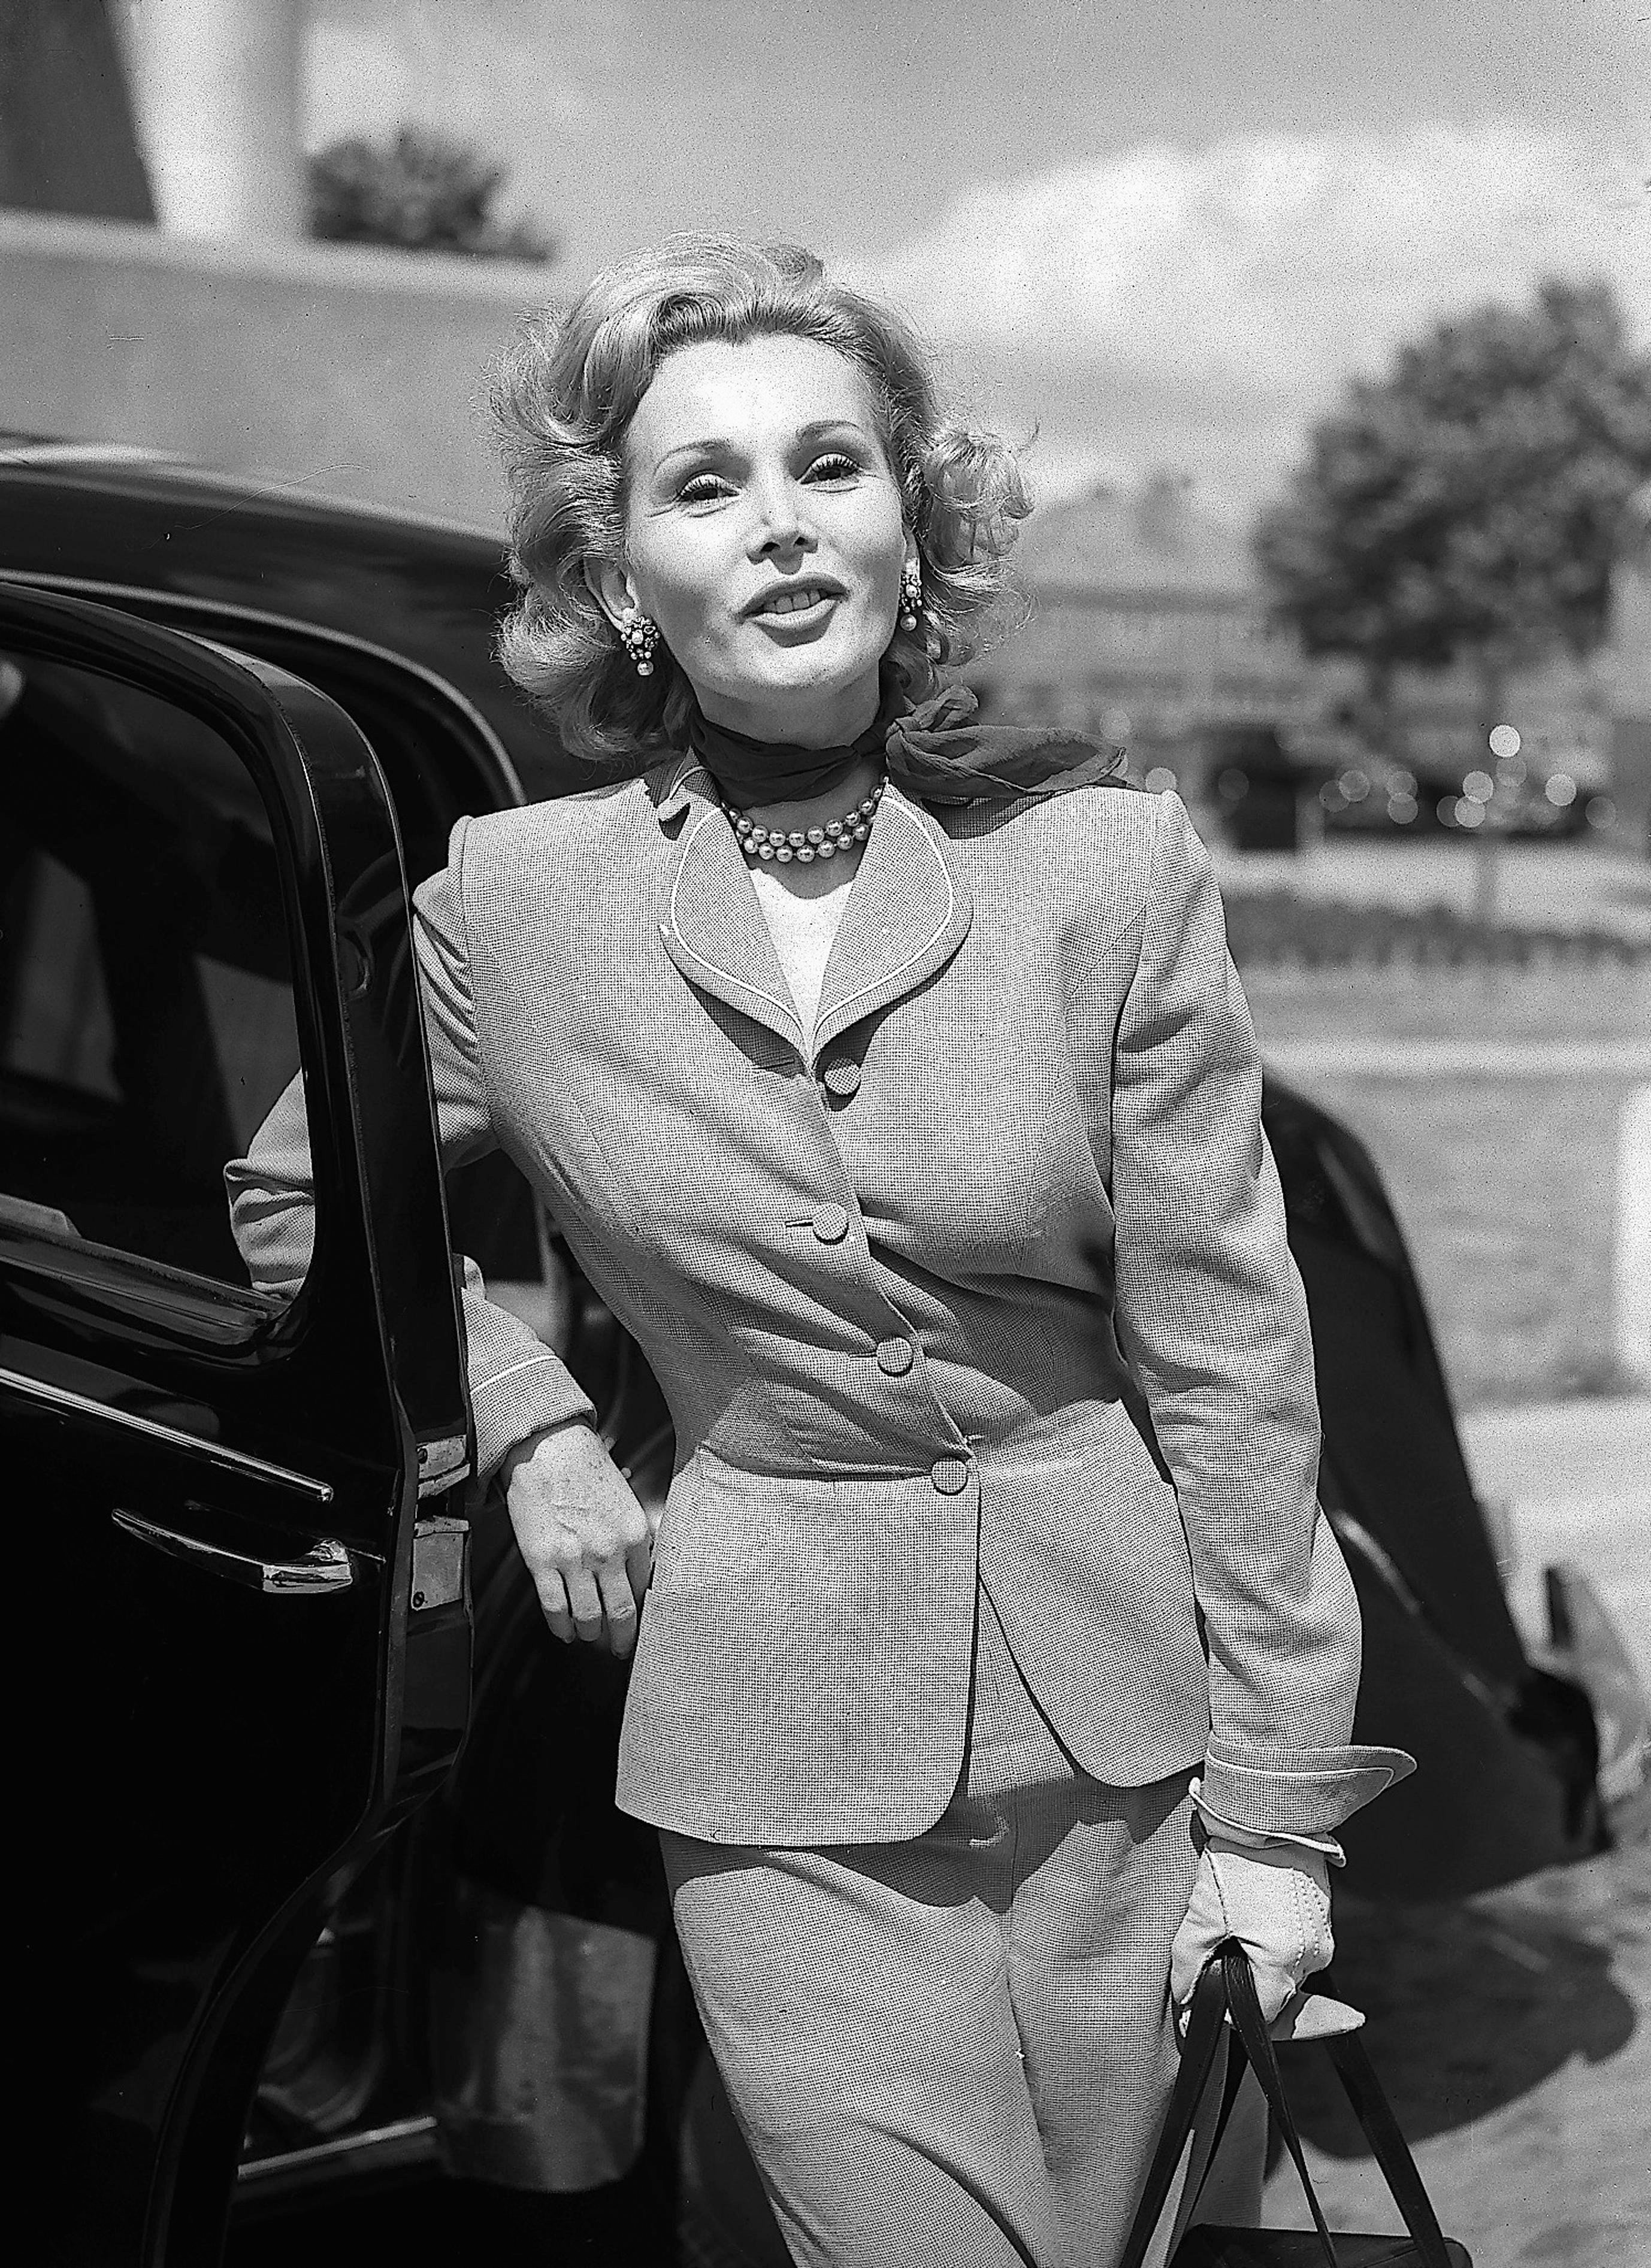 Zsa Zsa Gabor posing for a photo on August 13, 1952. | Source: Daily Mirror/Mirrorpix/Getty Images